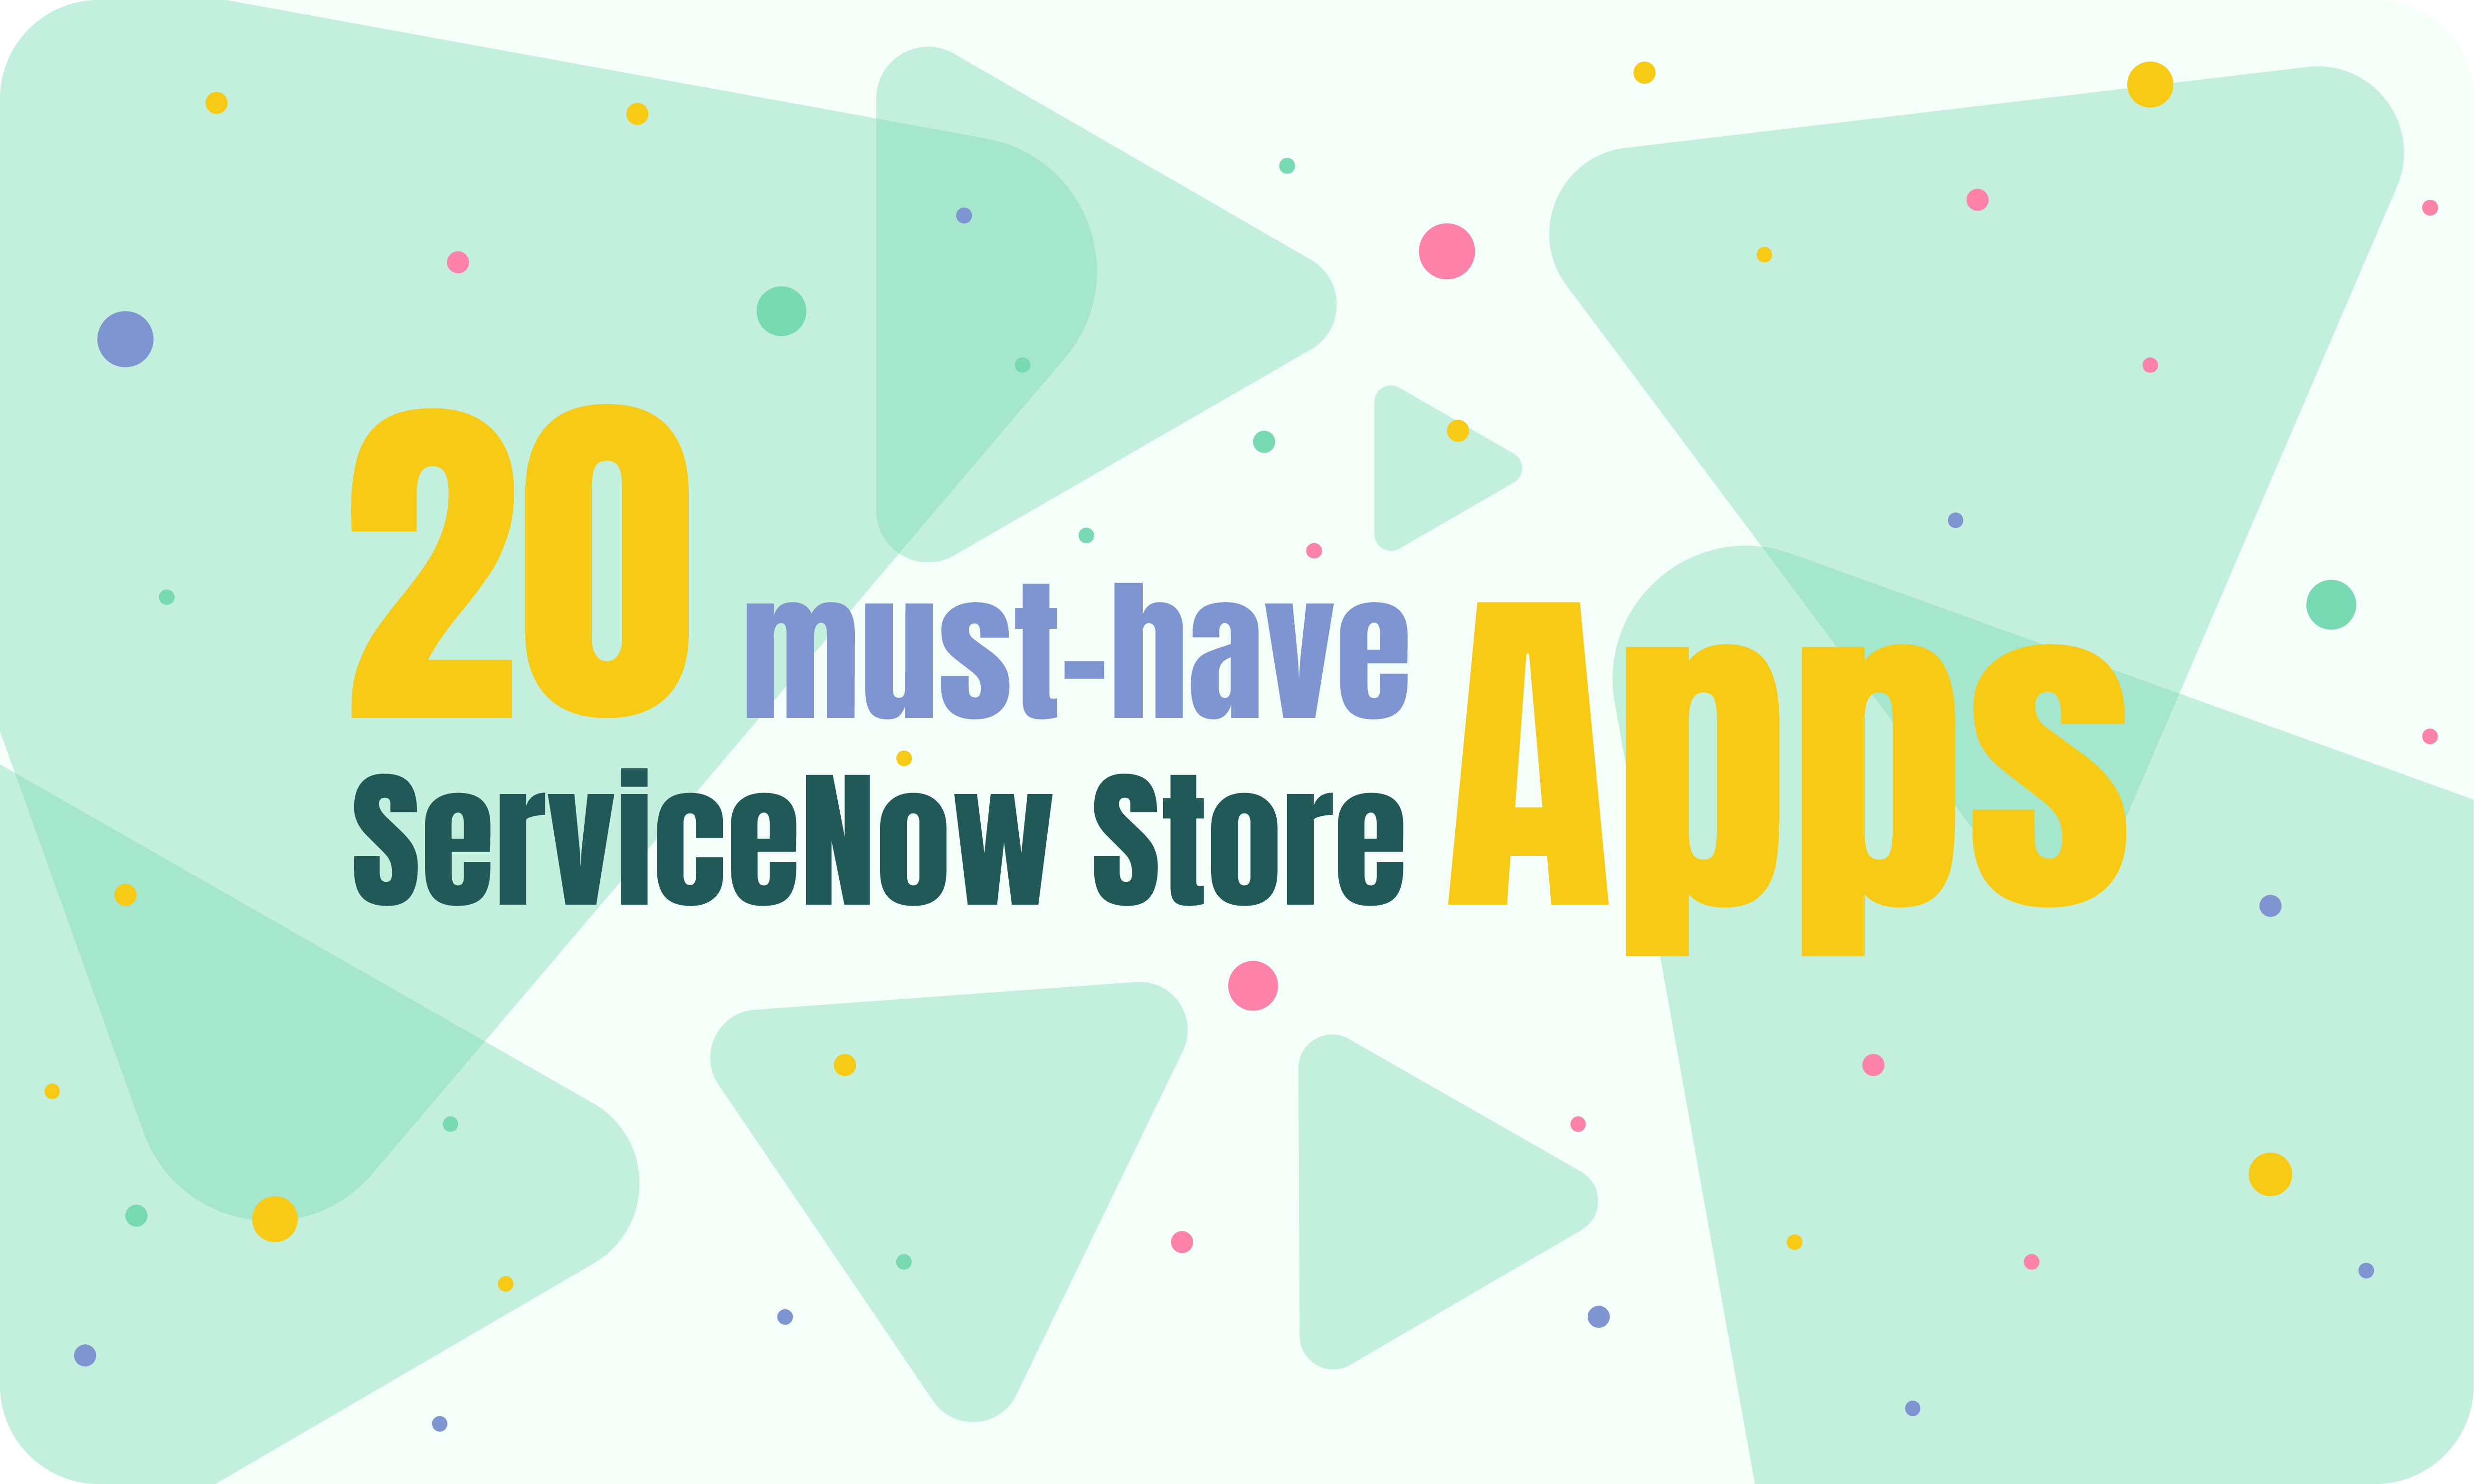 Best ServiceNow Apps: 20 Must-Have ServiceNow Store Apps